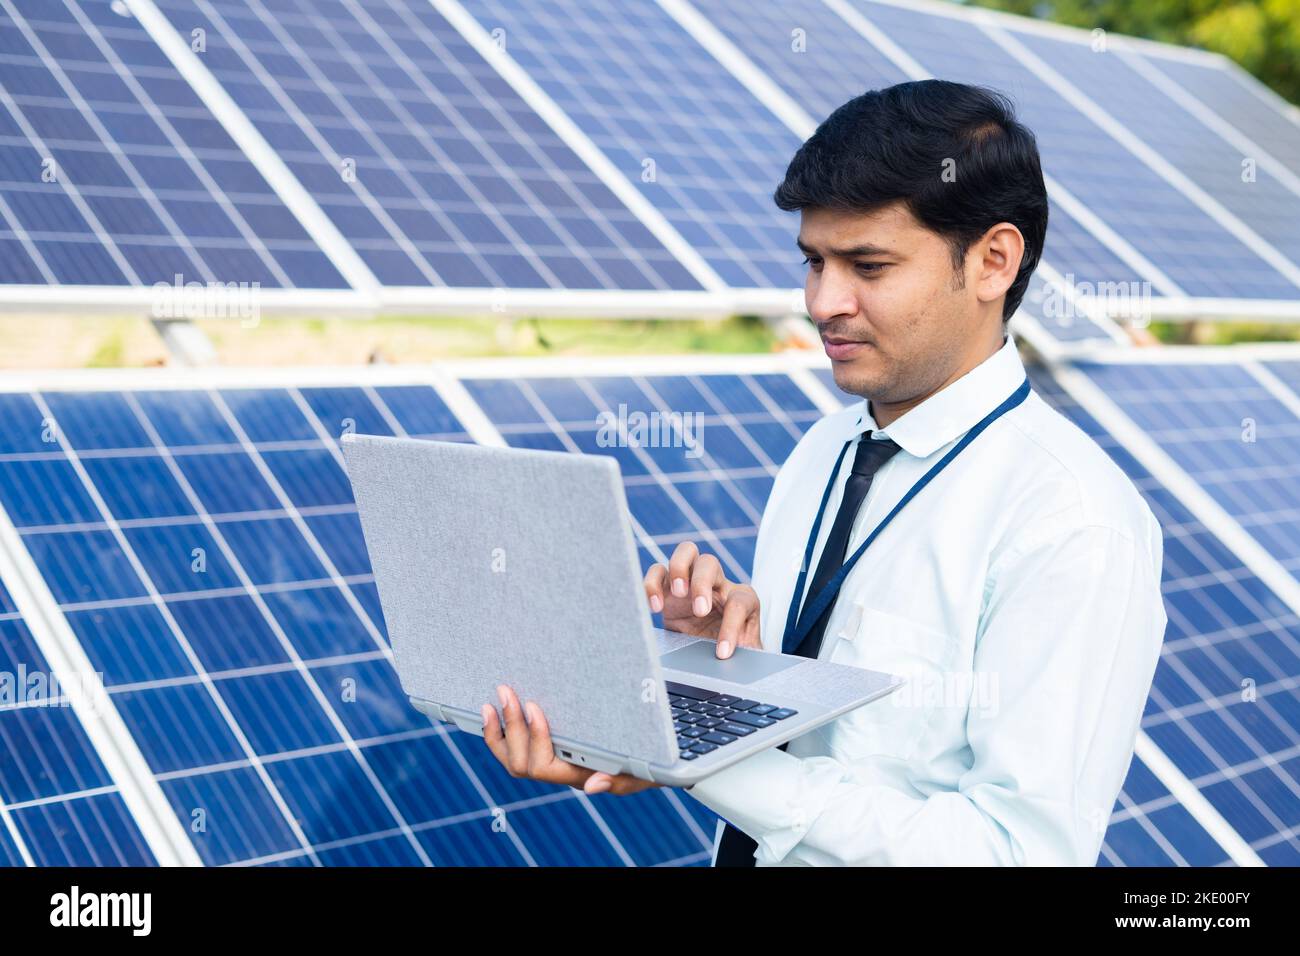 engineer or employee working on laptop in front of solar panel at farmland - concept of technology, sustainable lifestyle and professional occupation. Stock Photo